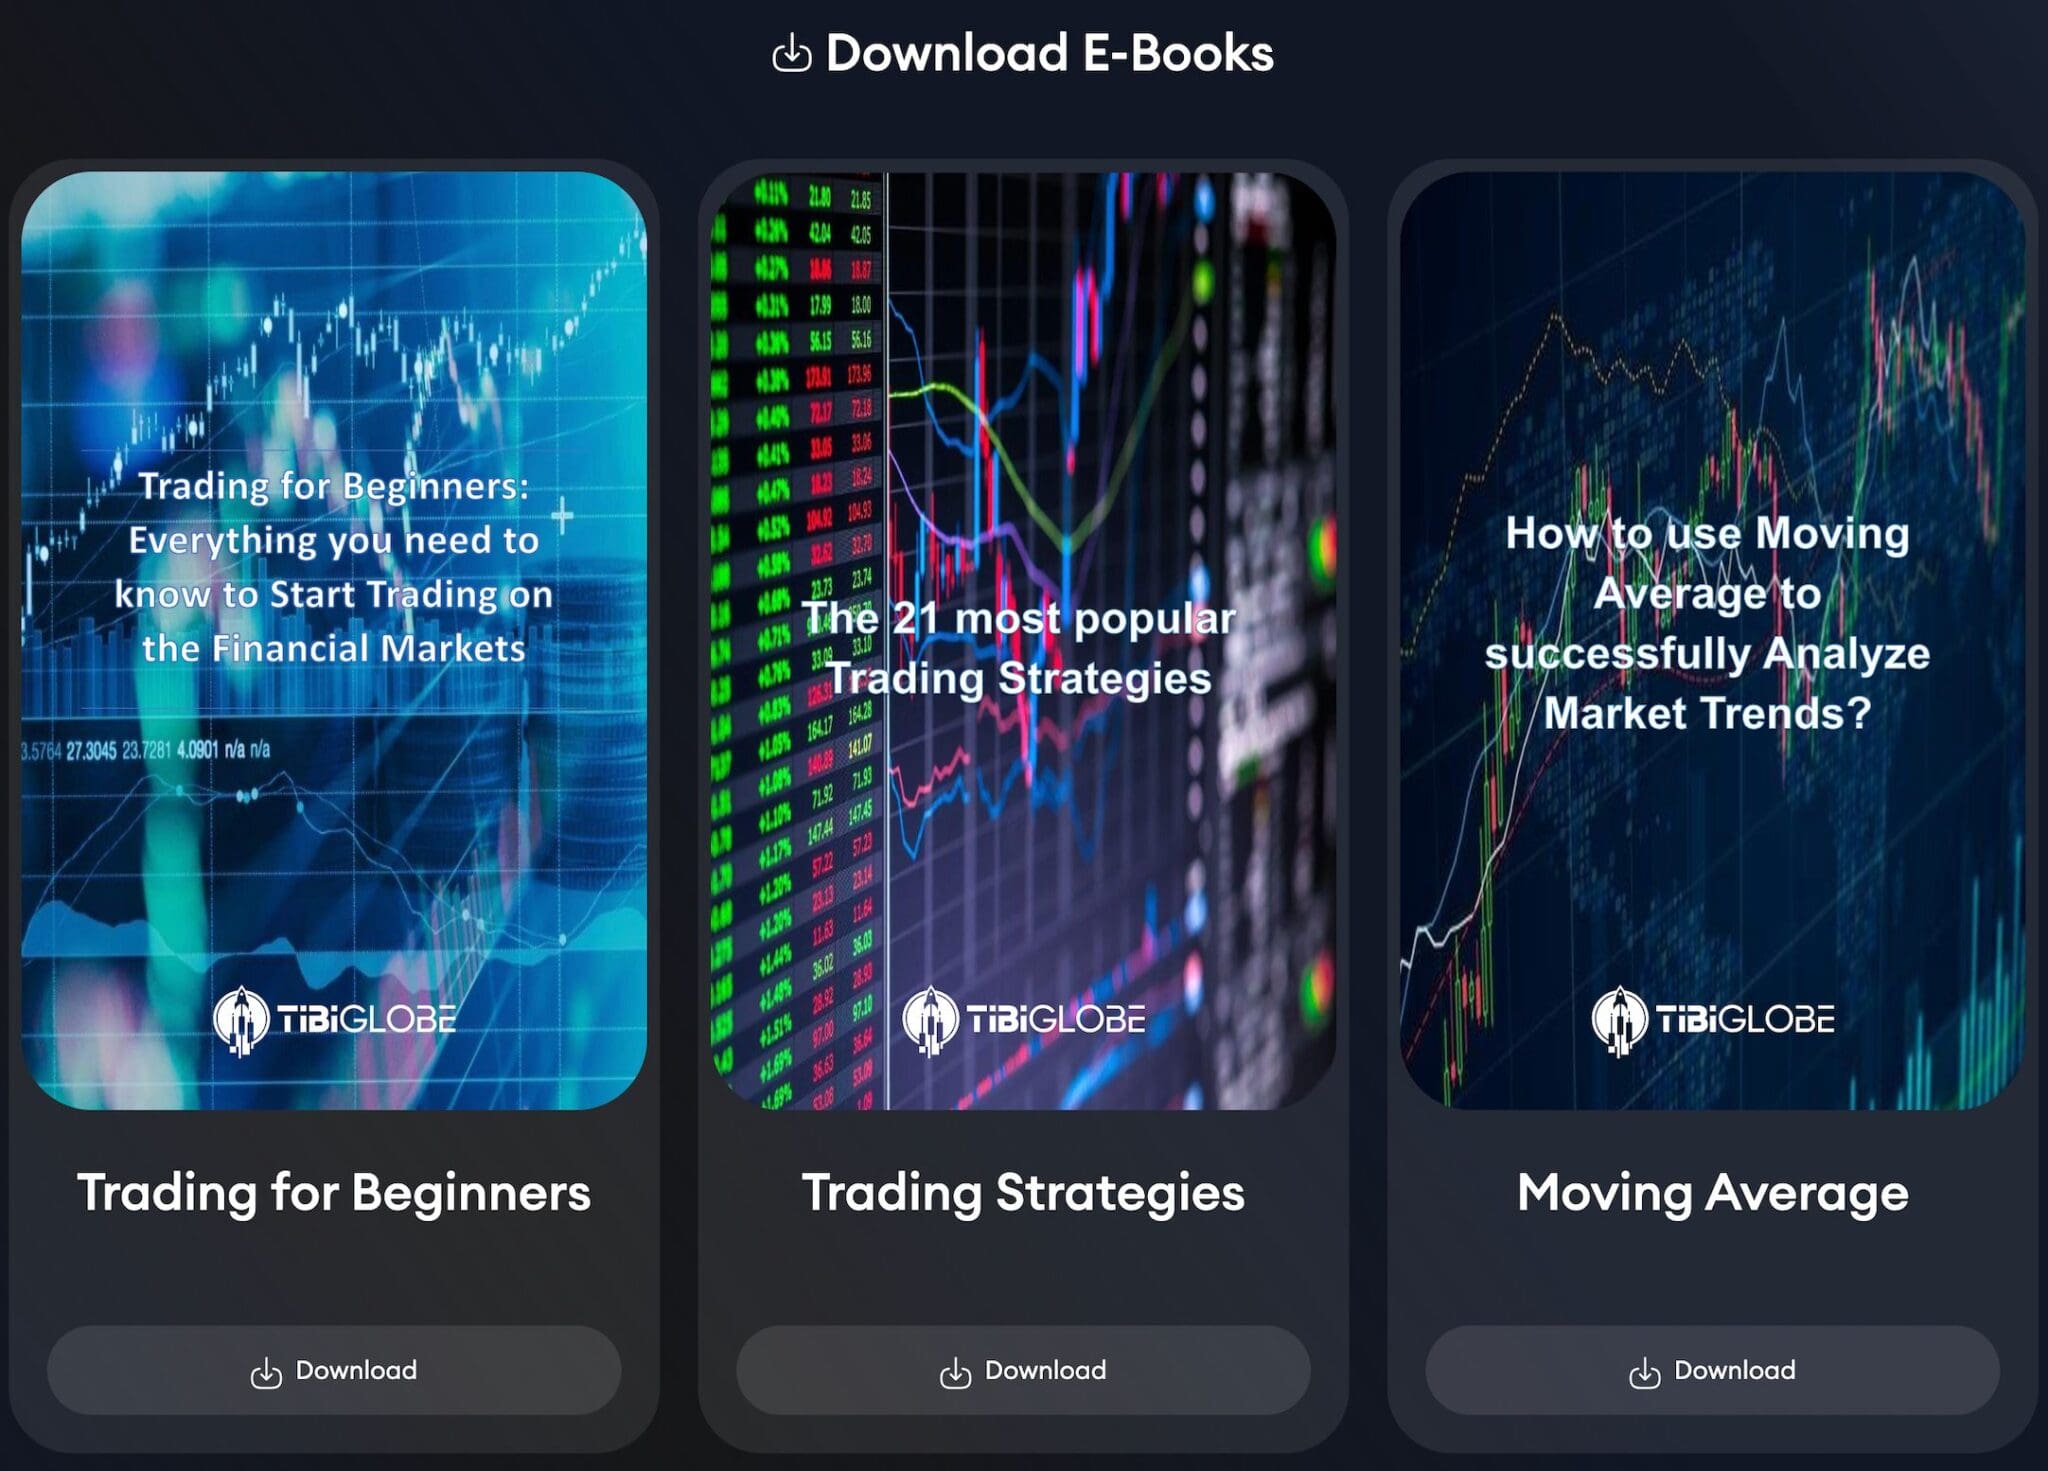 Educational guides available to download at TibiGlobe broker